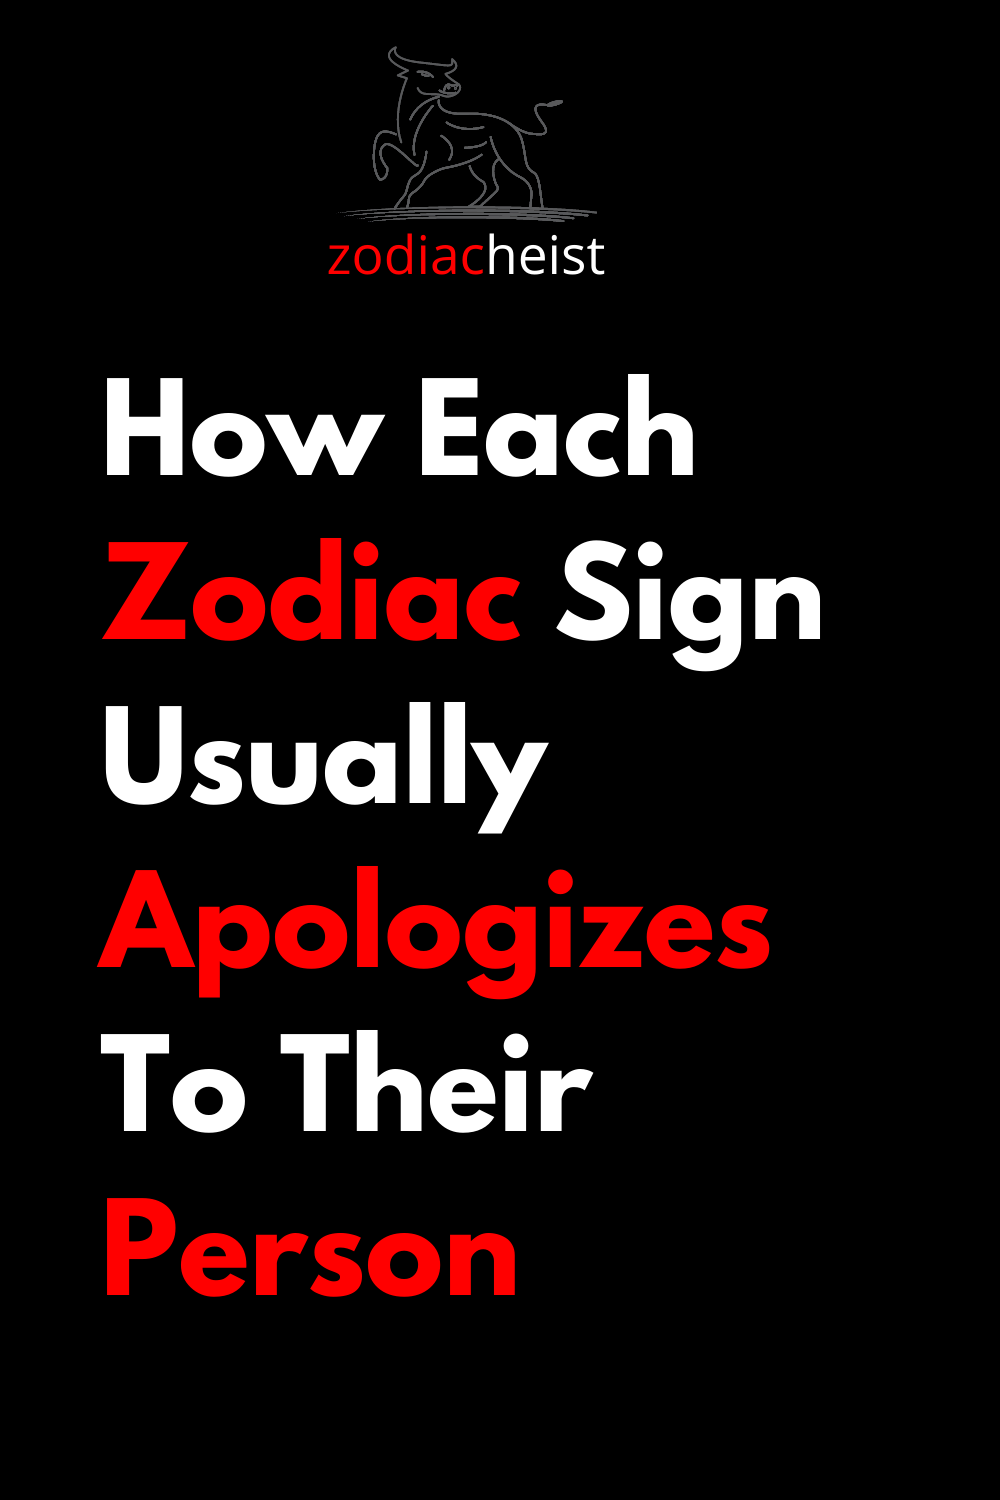 How Each Zodiac Sign Usually Apologizes To Their Person